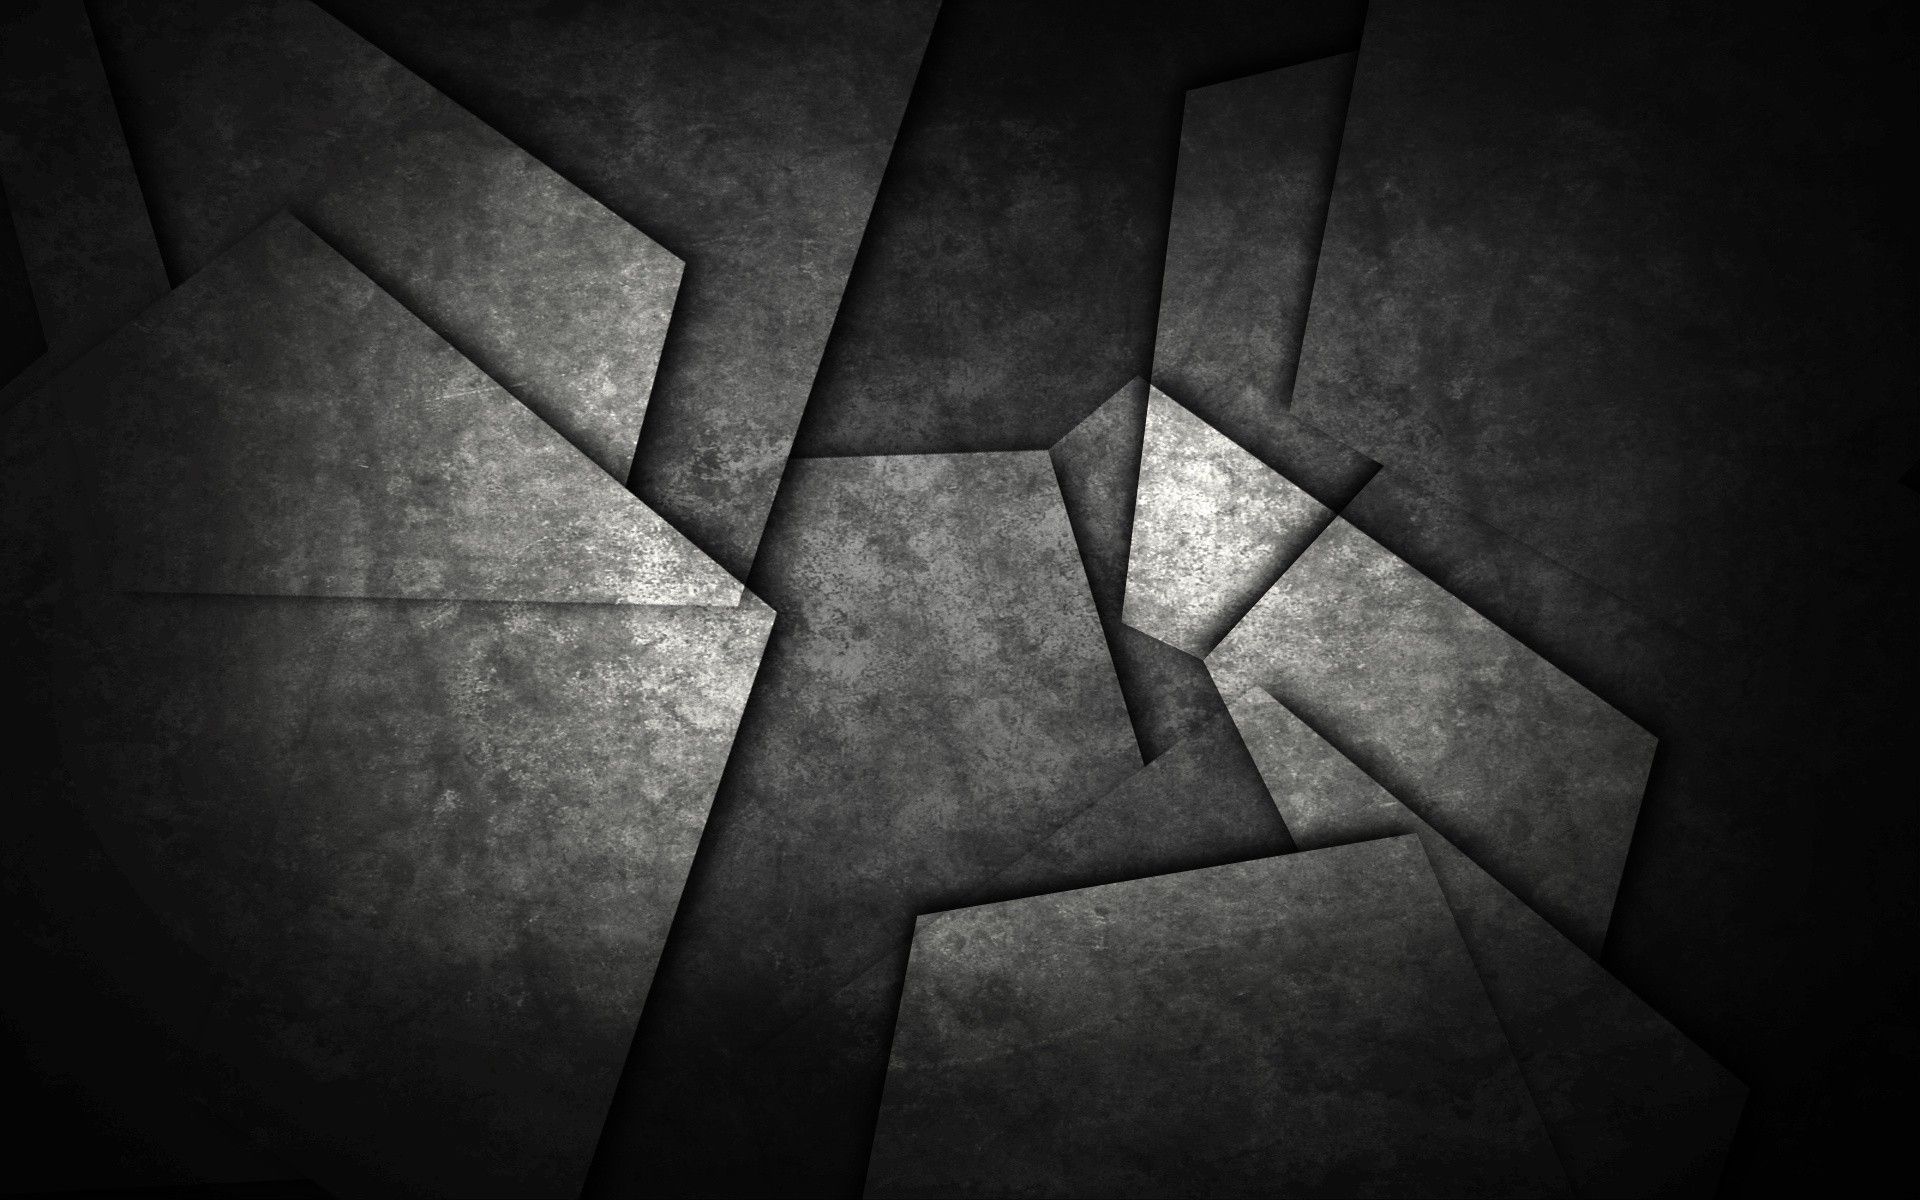 572396 1920x1080 abstract gray low poly wallpaper JPG 831 kB - Rare Gallery  HD Wallpapers